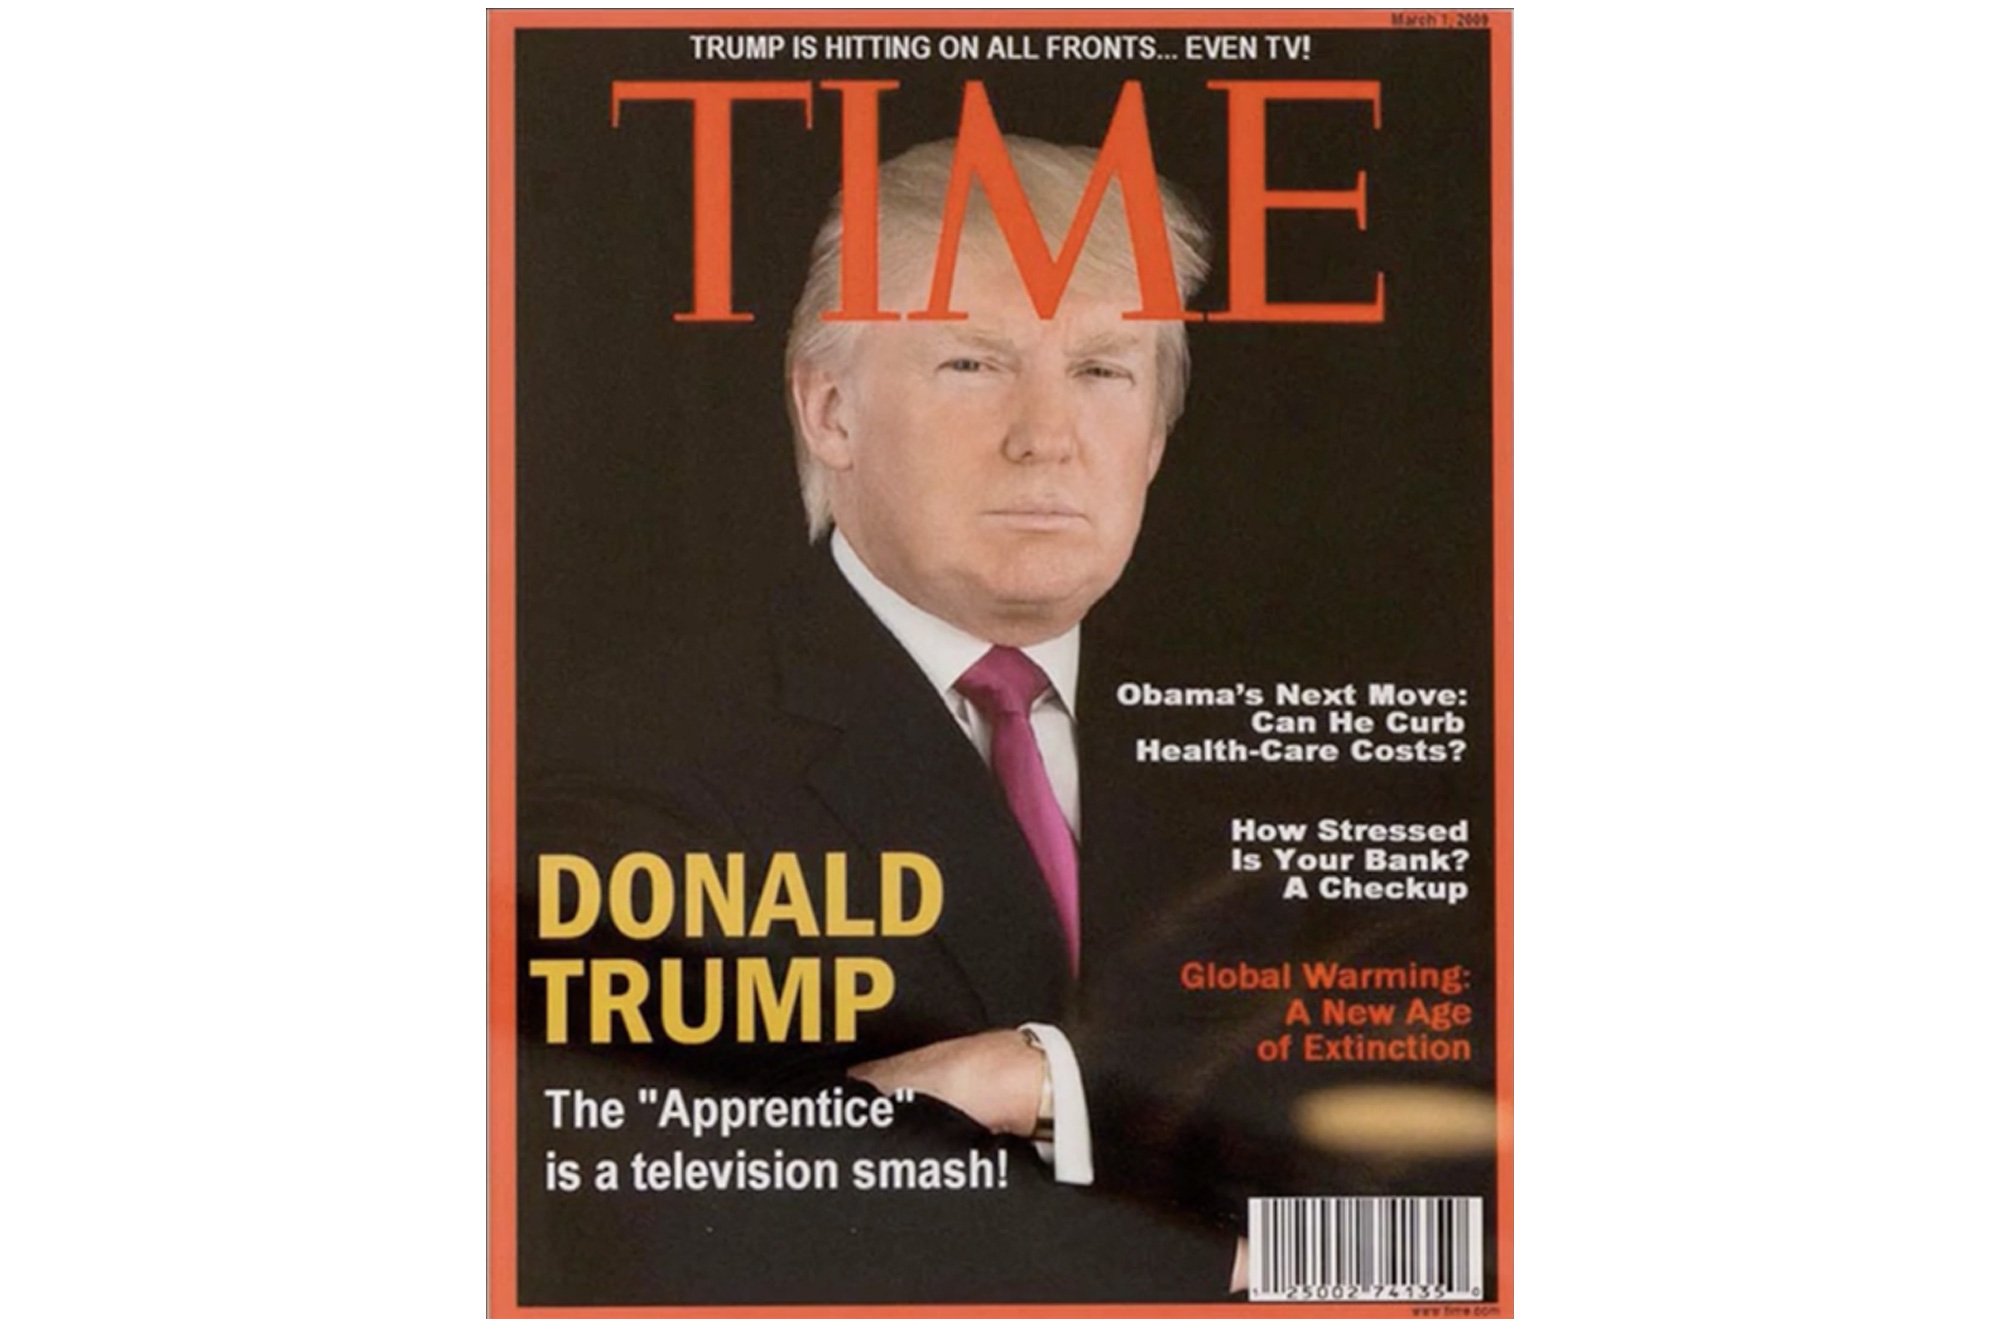 DJT lies..... ....like a lot. This feed imagines an alternate reality where he tweets the facts and doesn't ignore grammar. 
*TIME image is a DJT fabrication